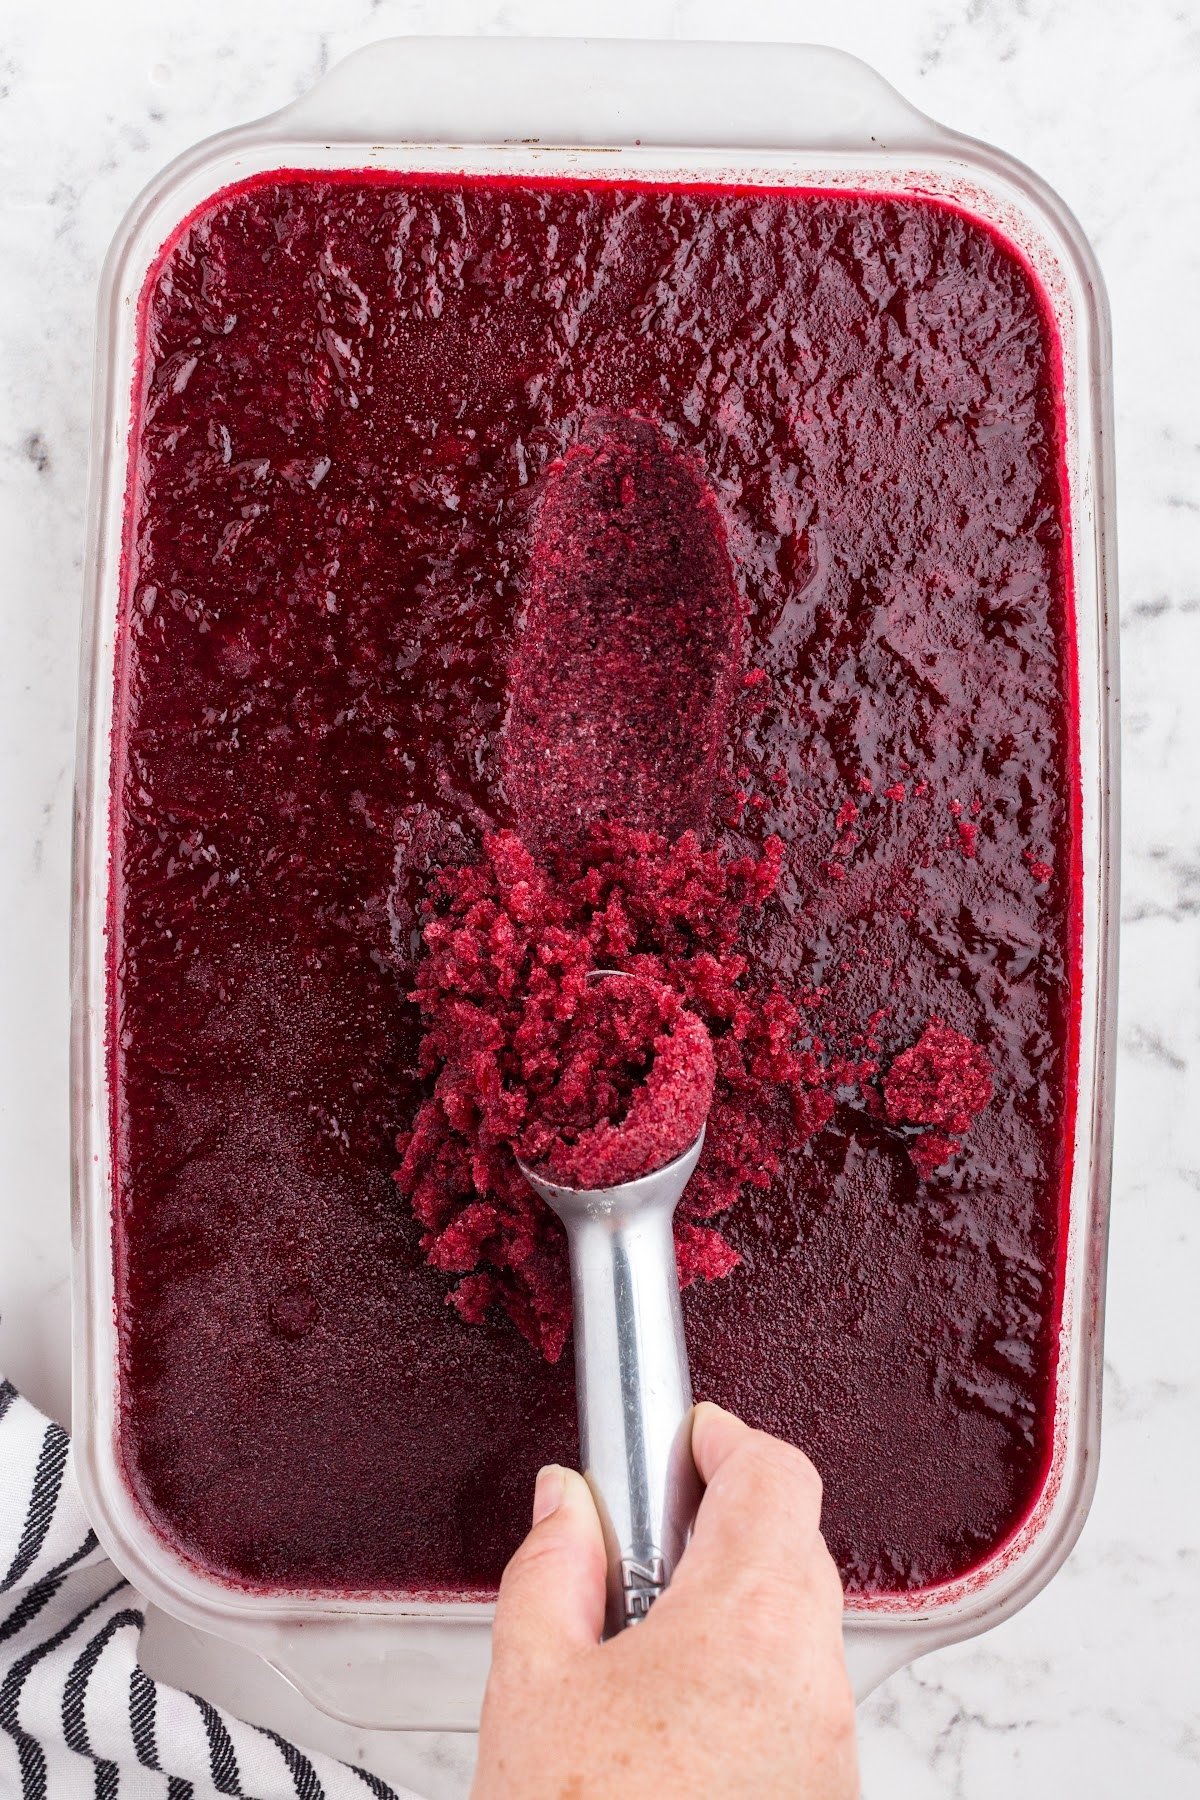 An ice cream scoop scooping out the frozen berry mixture from a 9x13.